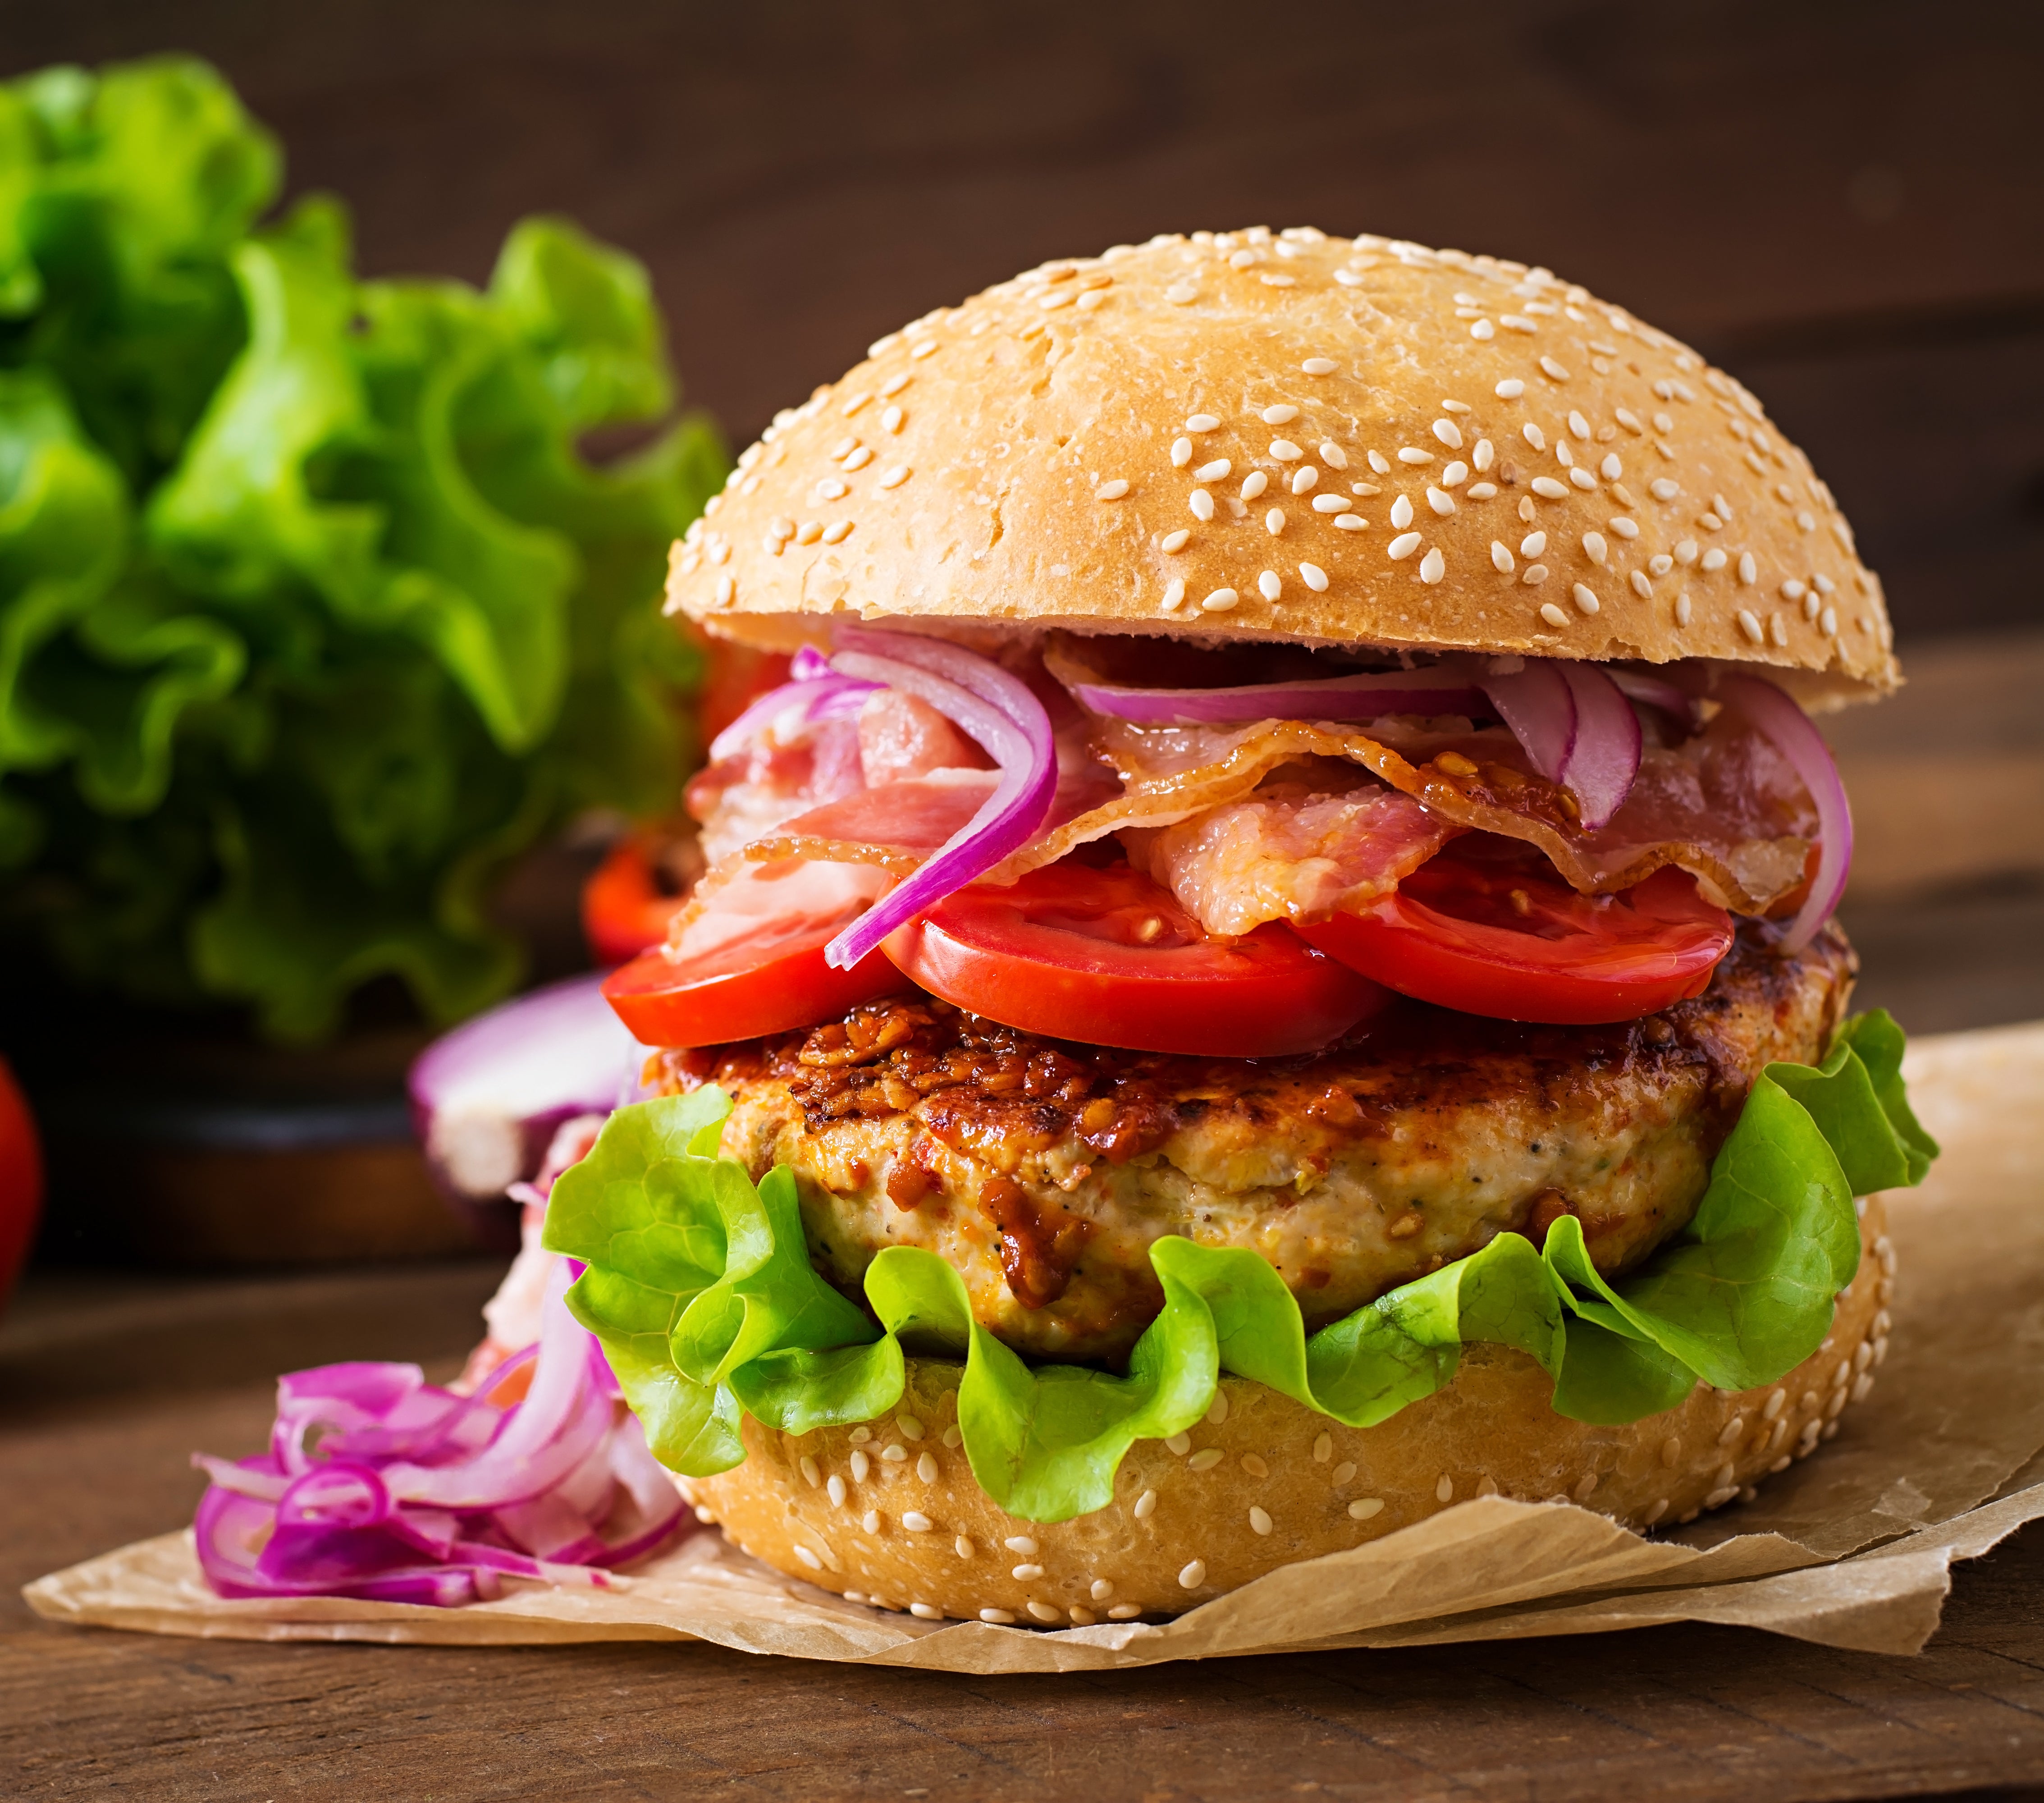 Plant-Based Burger - A Delicious and Healthy Alternative